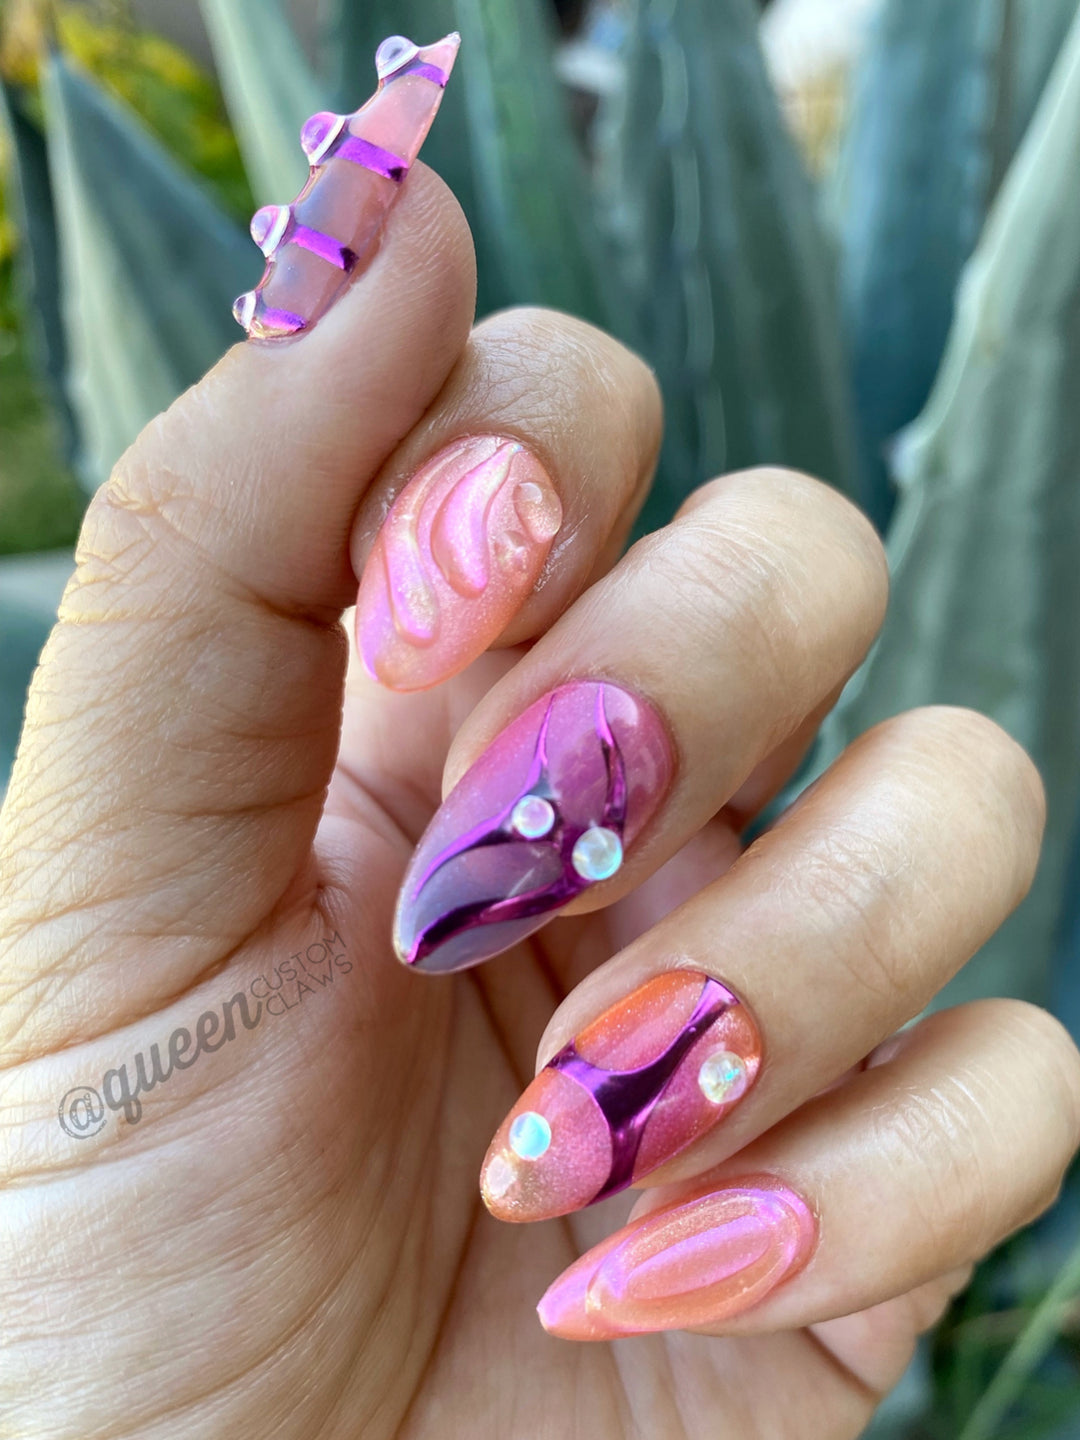 Queen Custom Claws Luxury Press on nails